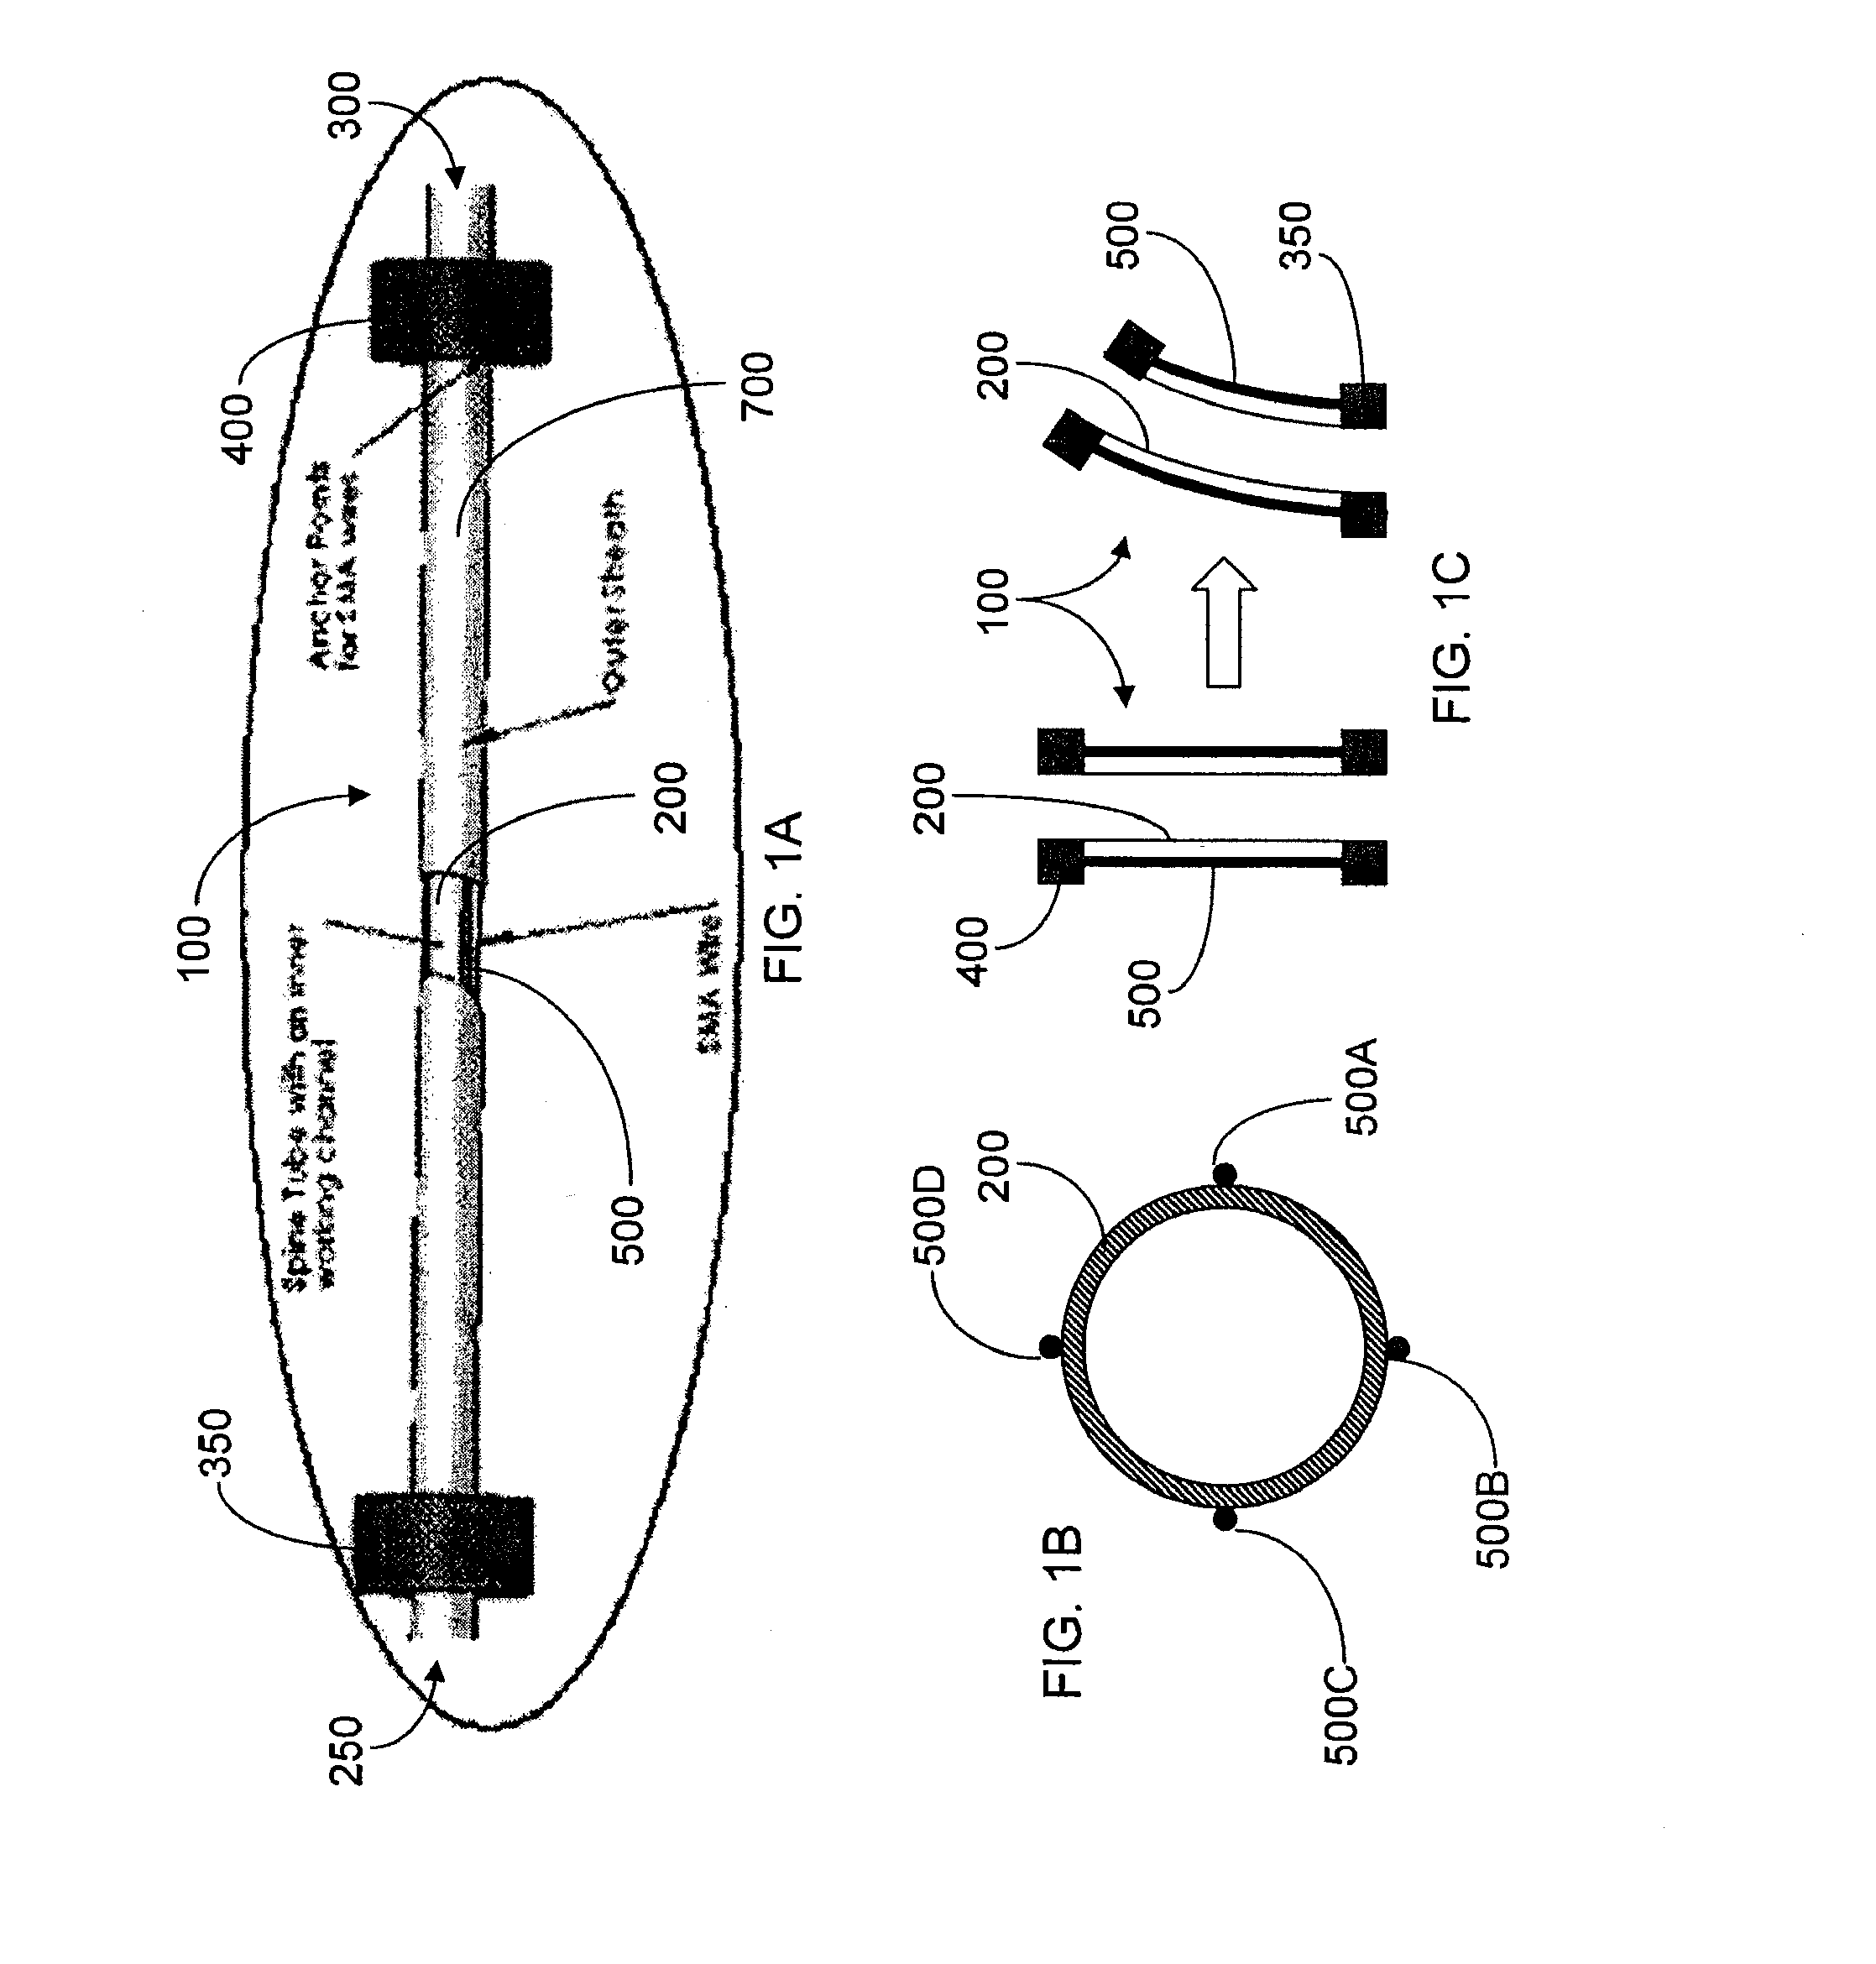 Active catheter device and associated system and method